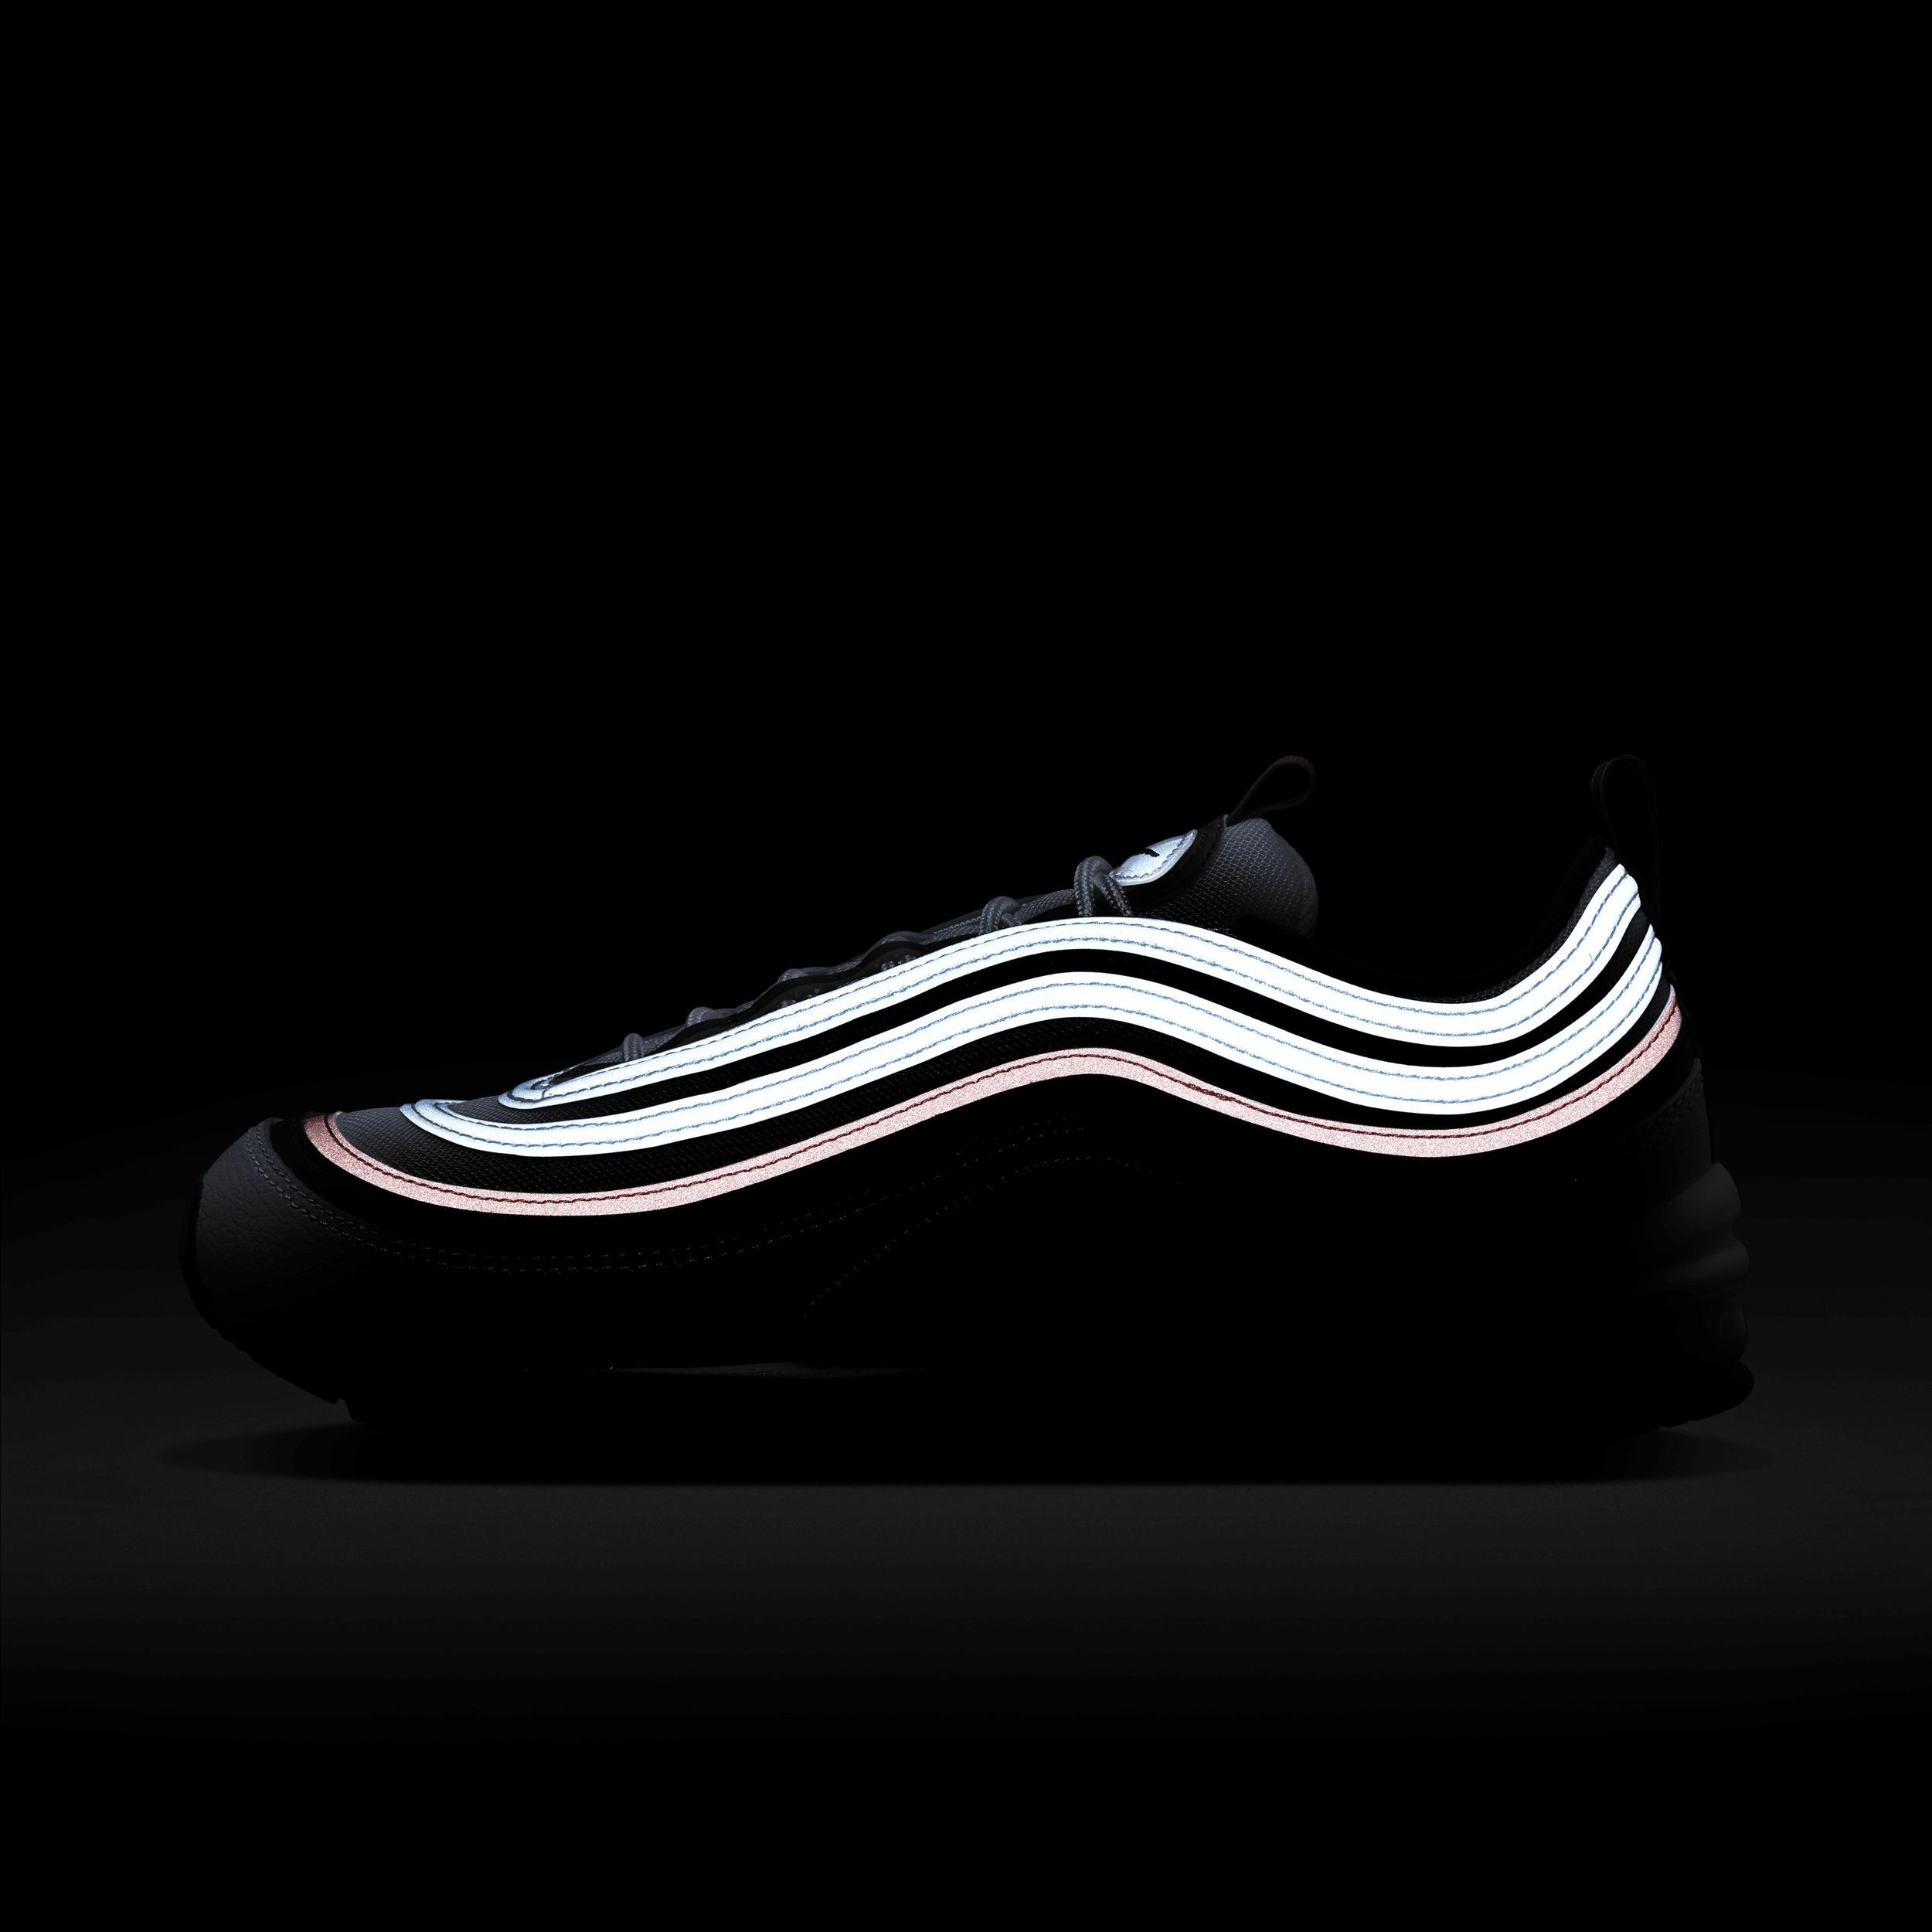 Nike Men's Air Max 97 Shoes Product Image